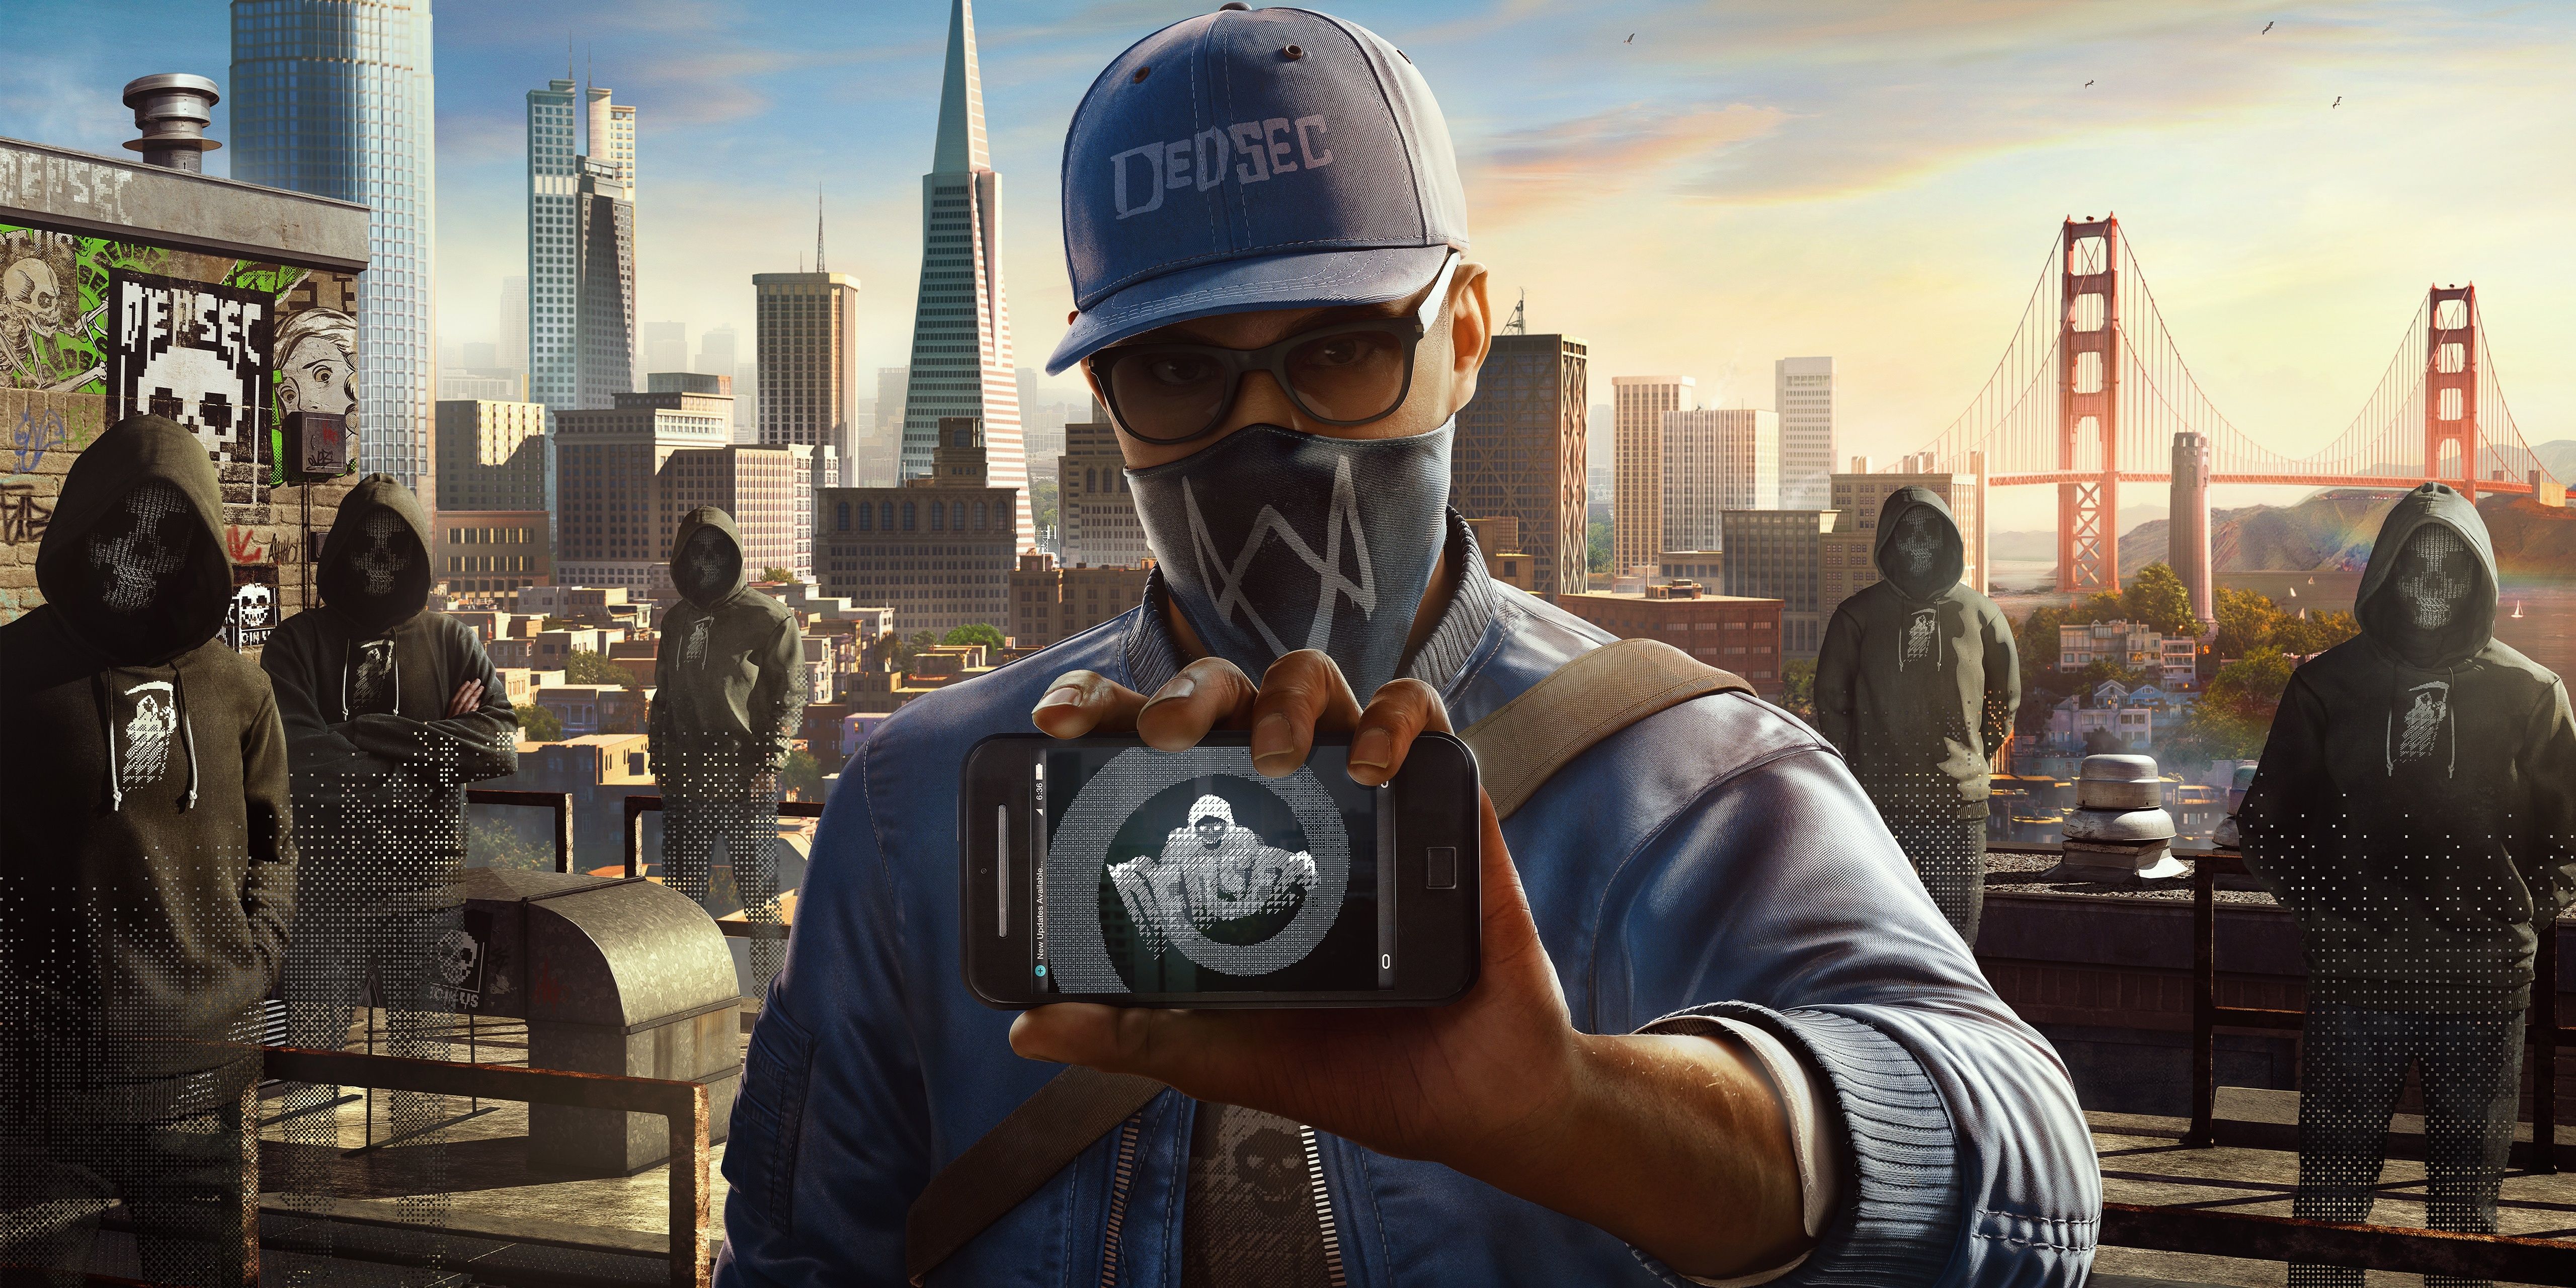 Marcus of Watch Dogs 2 holding a mobile with San Francisco Bay and Golden Gate Bridge in background